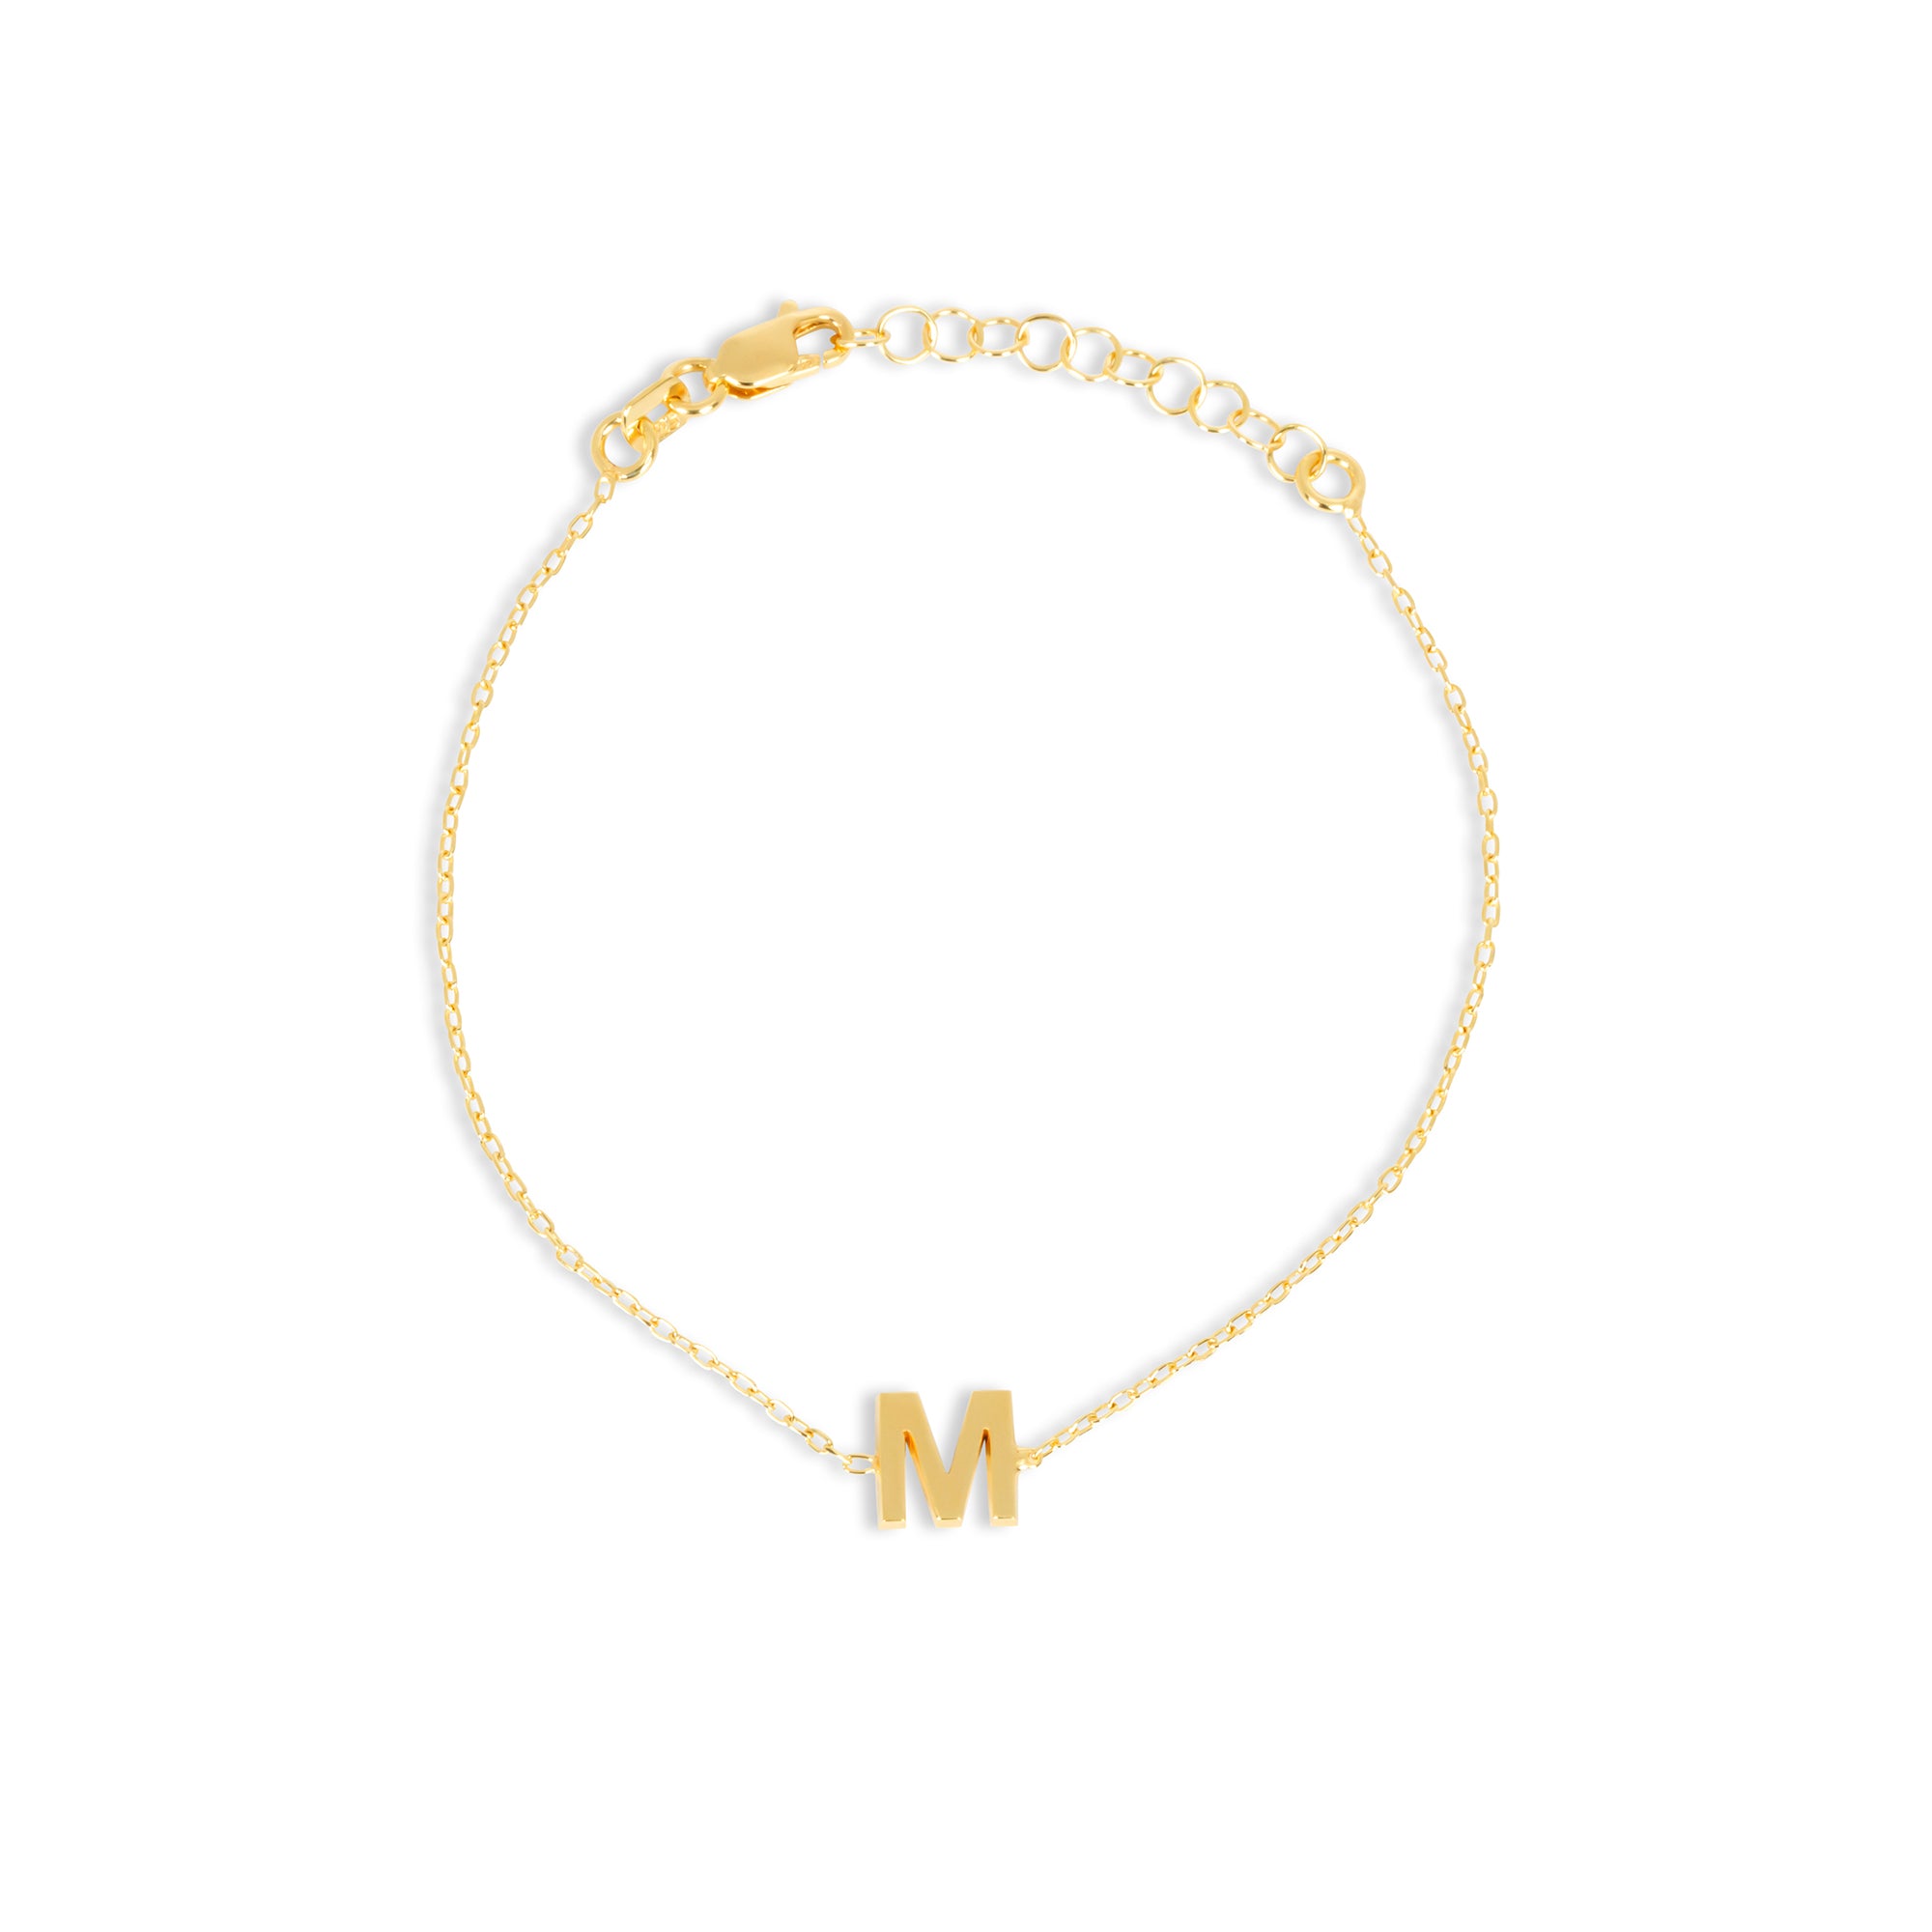 THE UPPERCASE INITIAL BRACELET – The M Jewelers